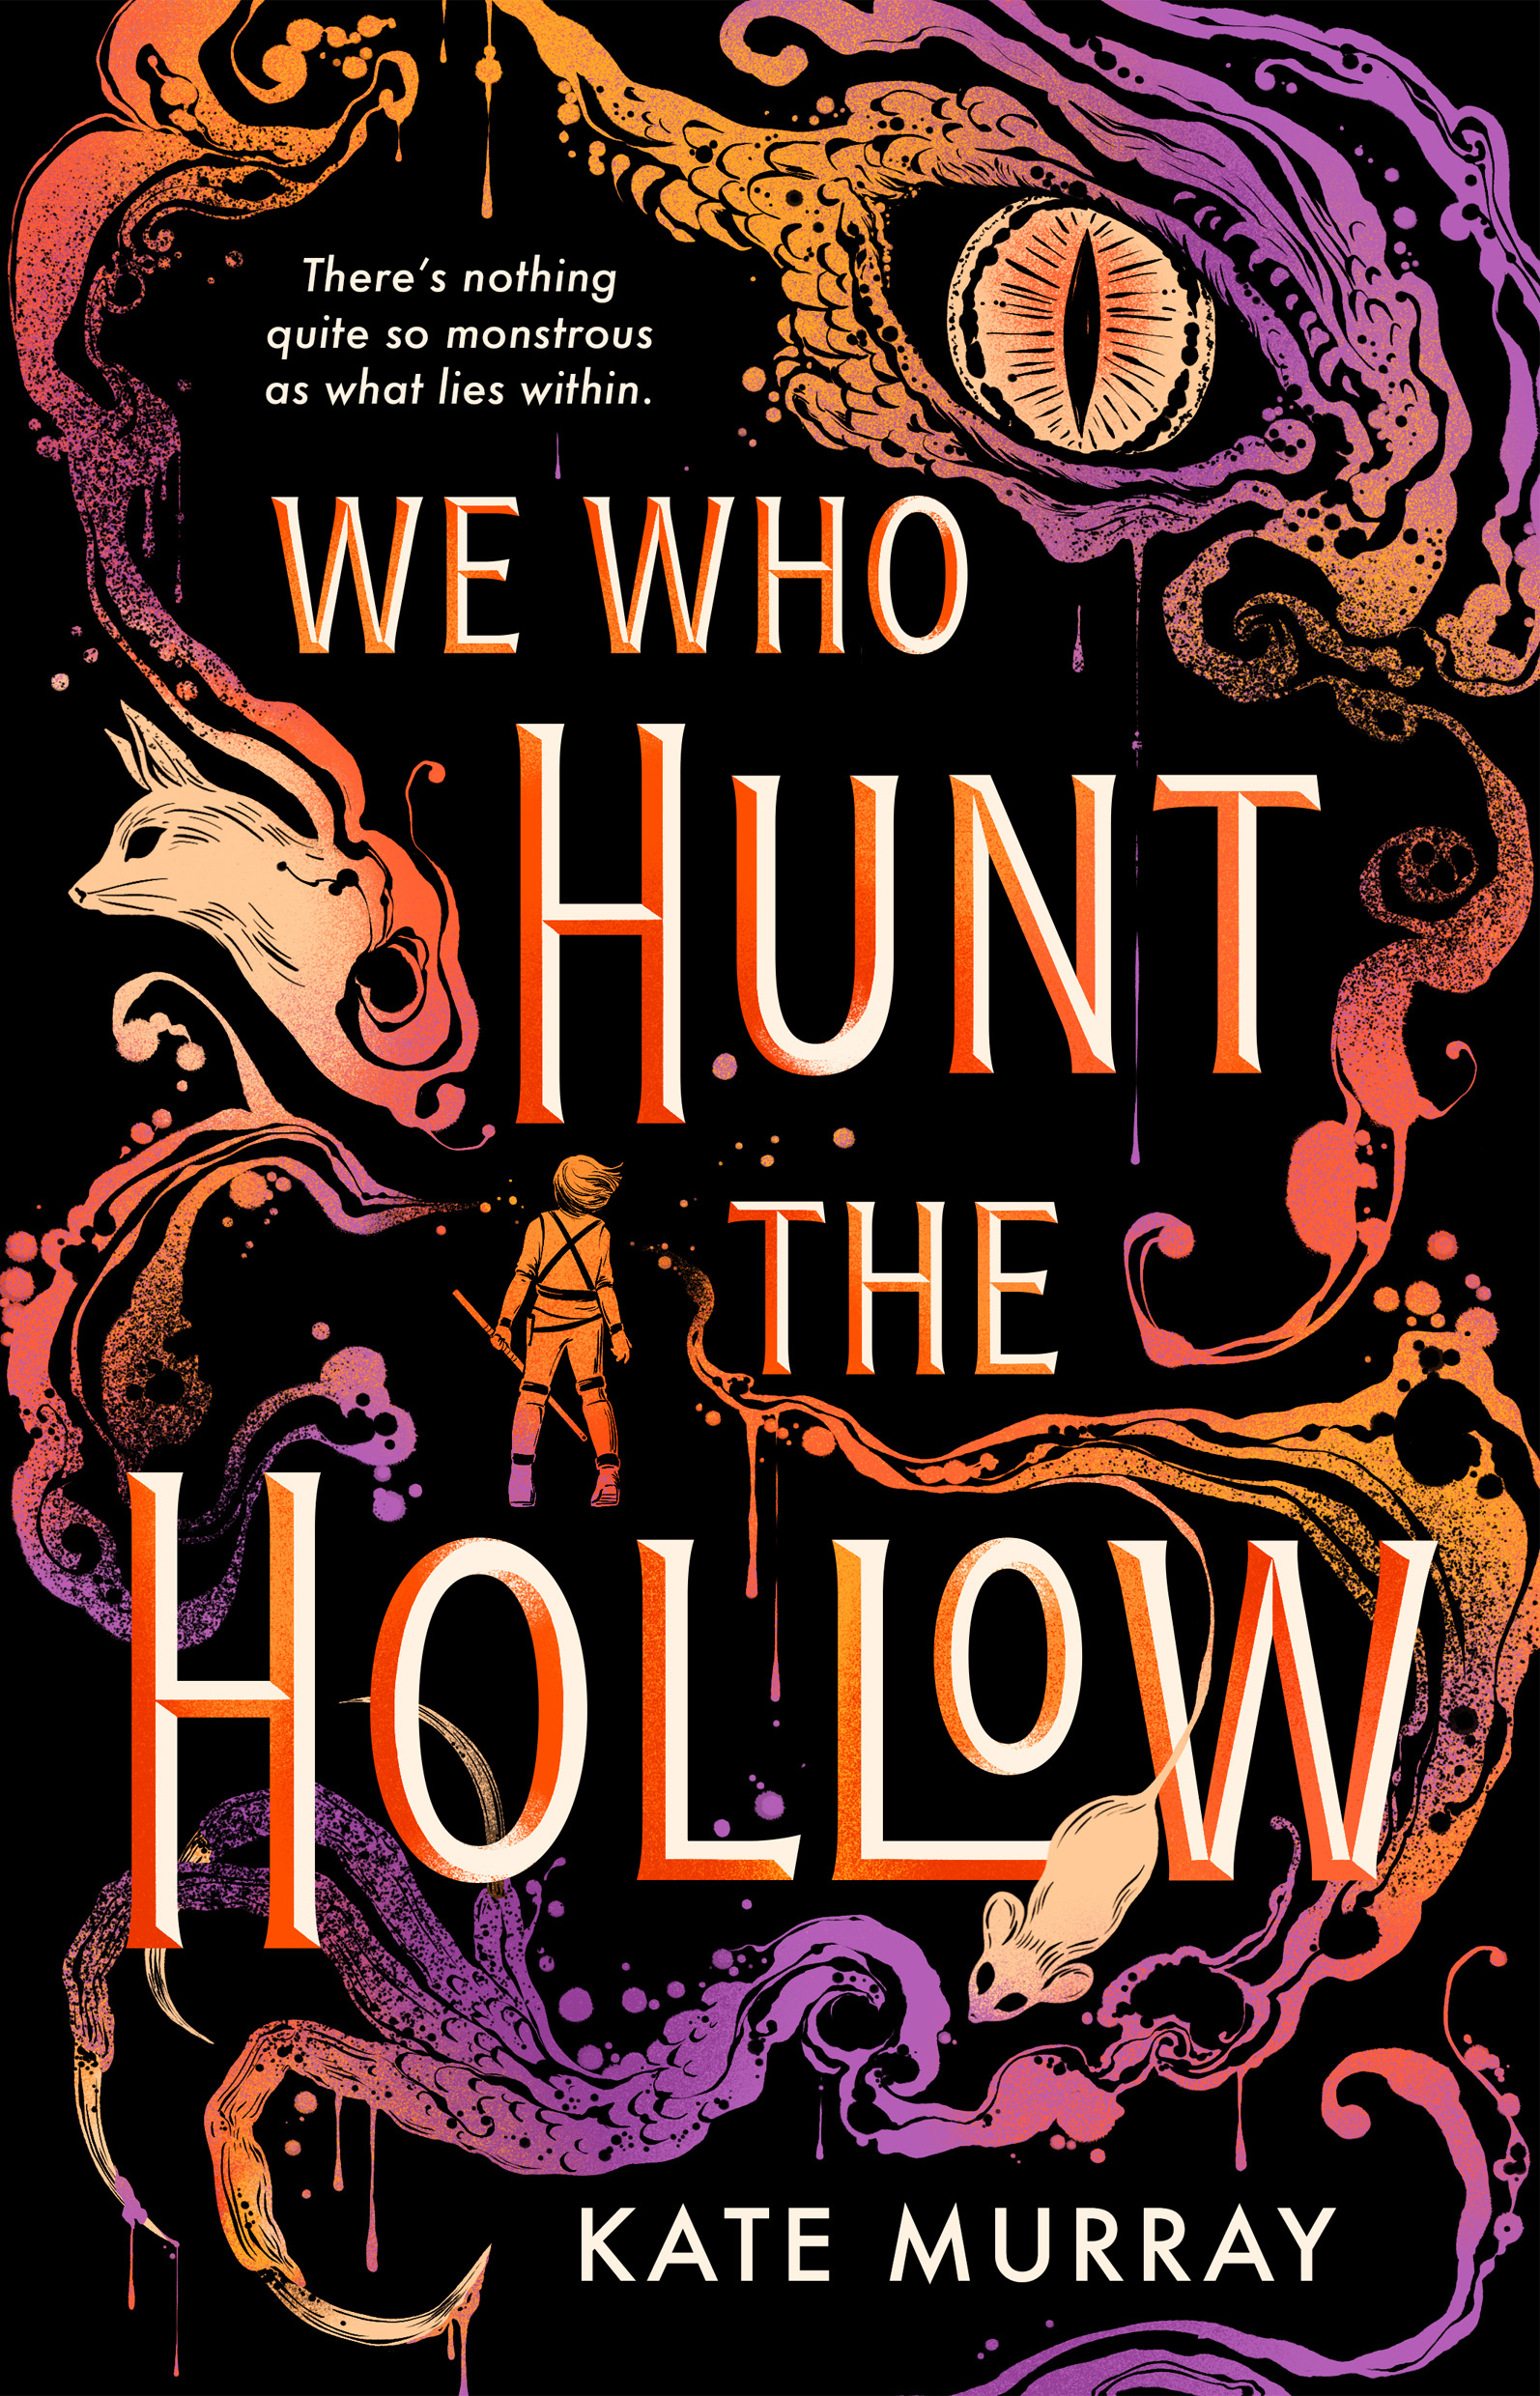 We Who Hunt the Hollow